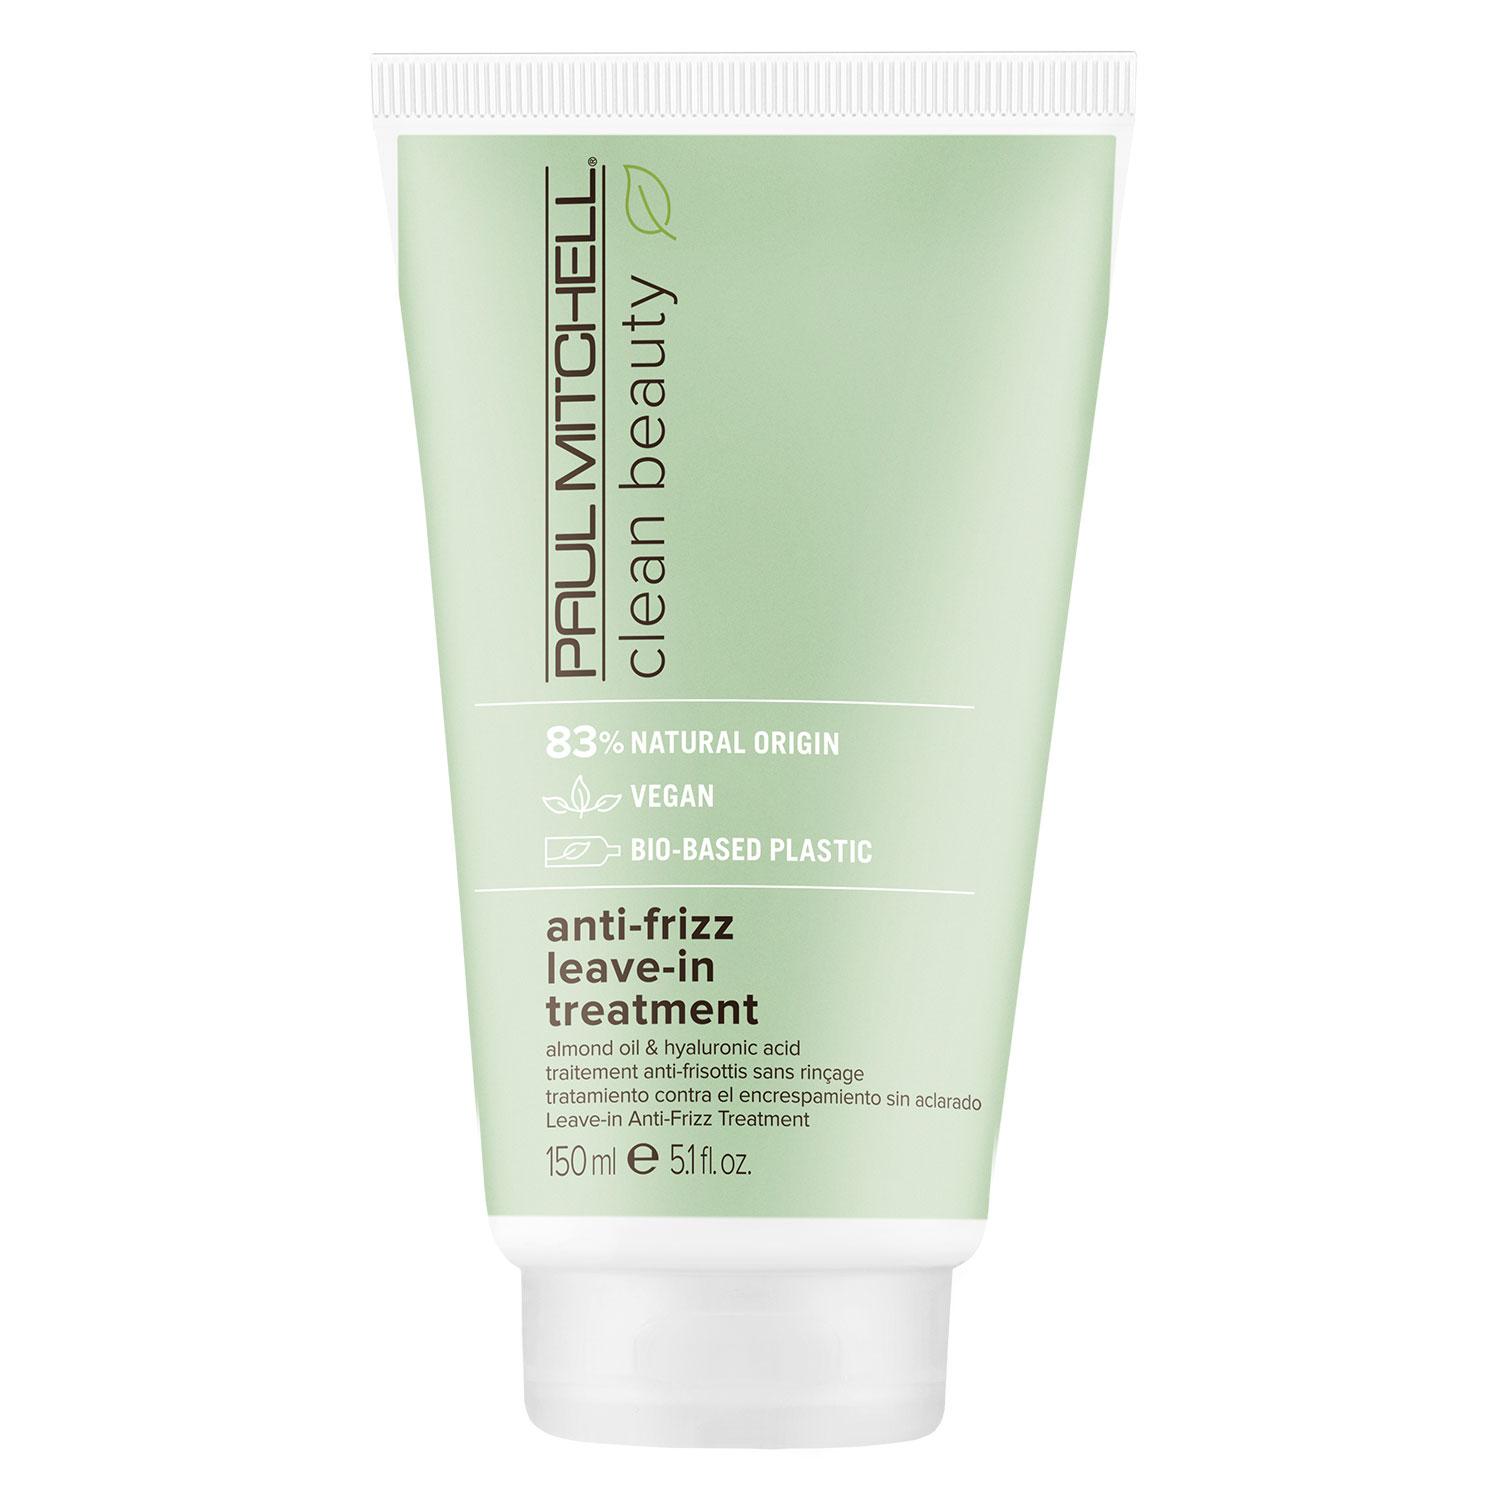 Paul Mitchell Clean Beauty - Anti-Frizz Leave-In Treatment